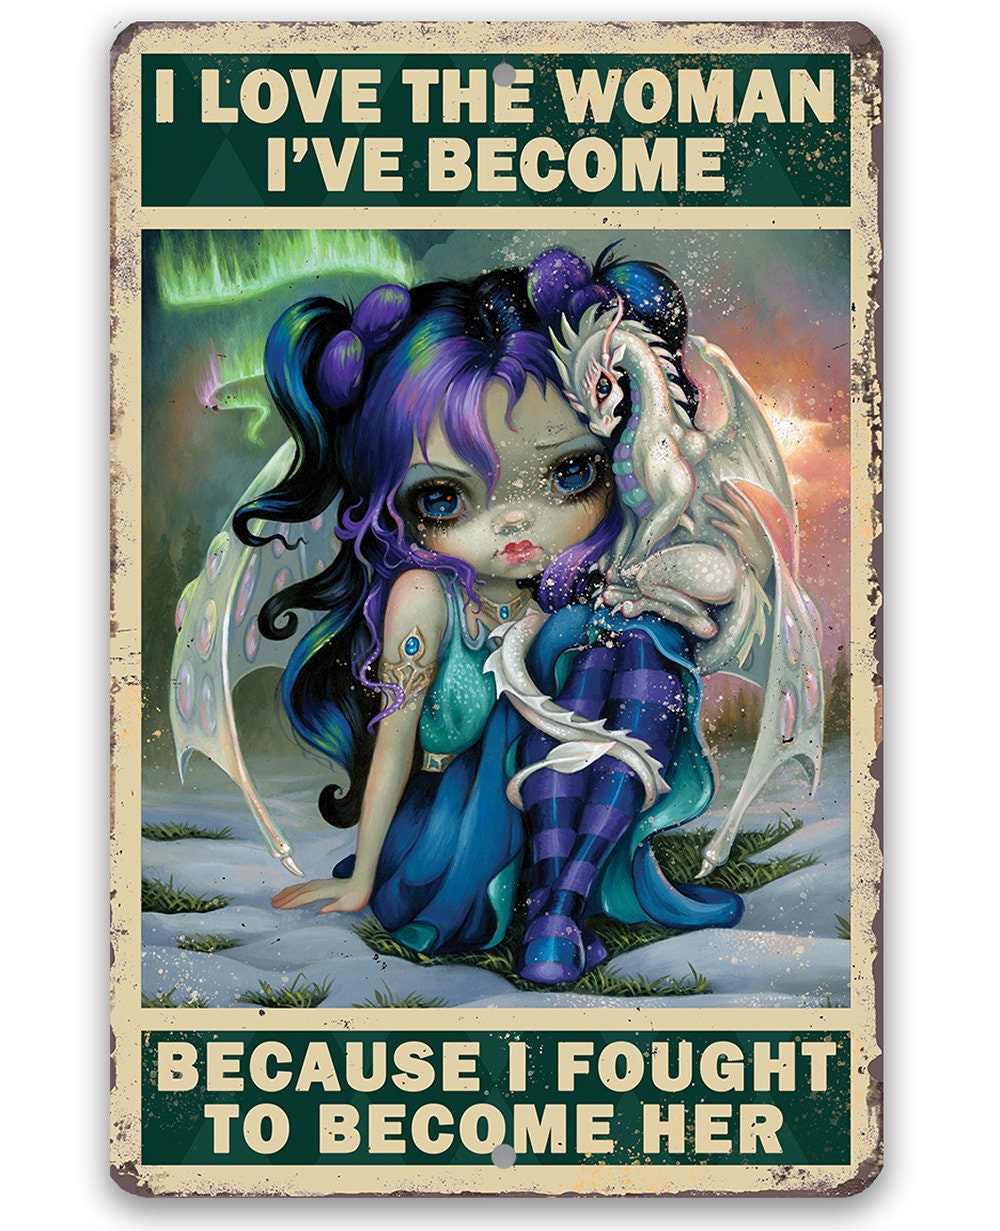 I Love The Woman I've Become - Metal Sign Metal Sign Lone Star Art 